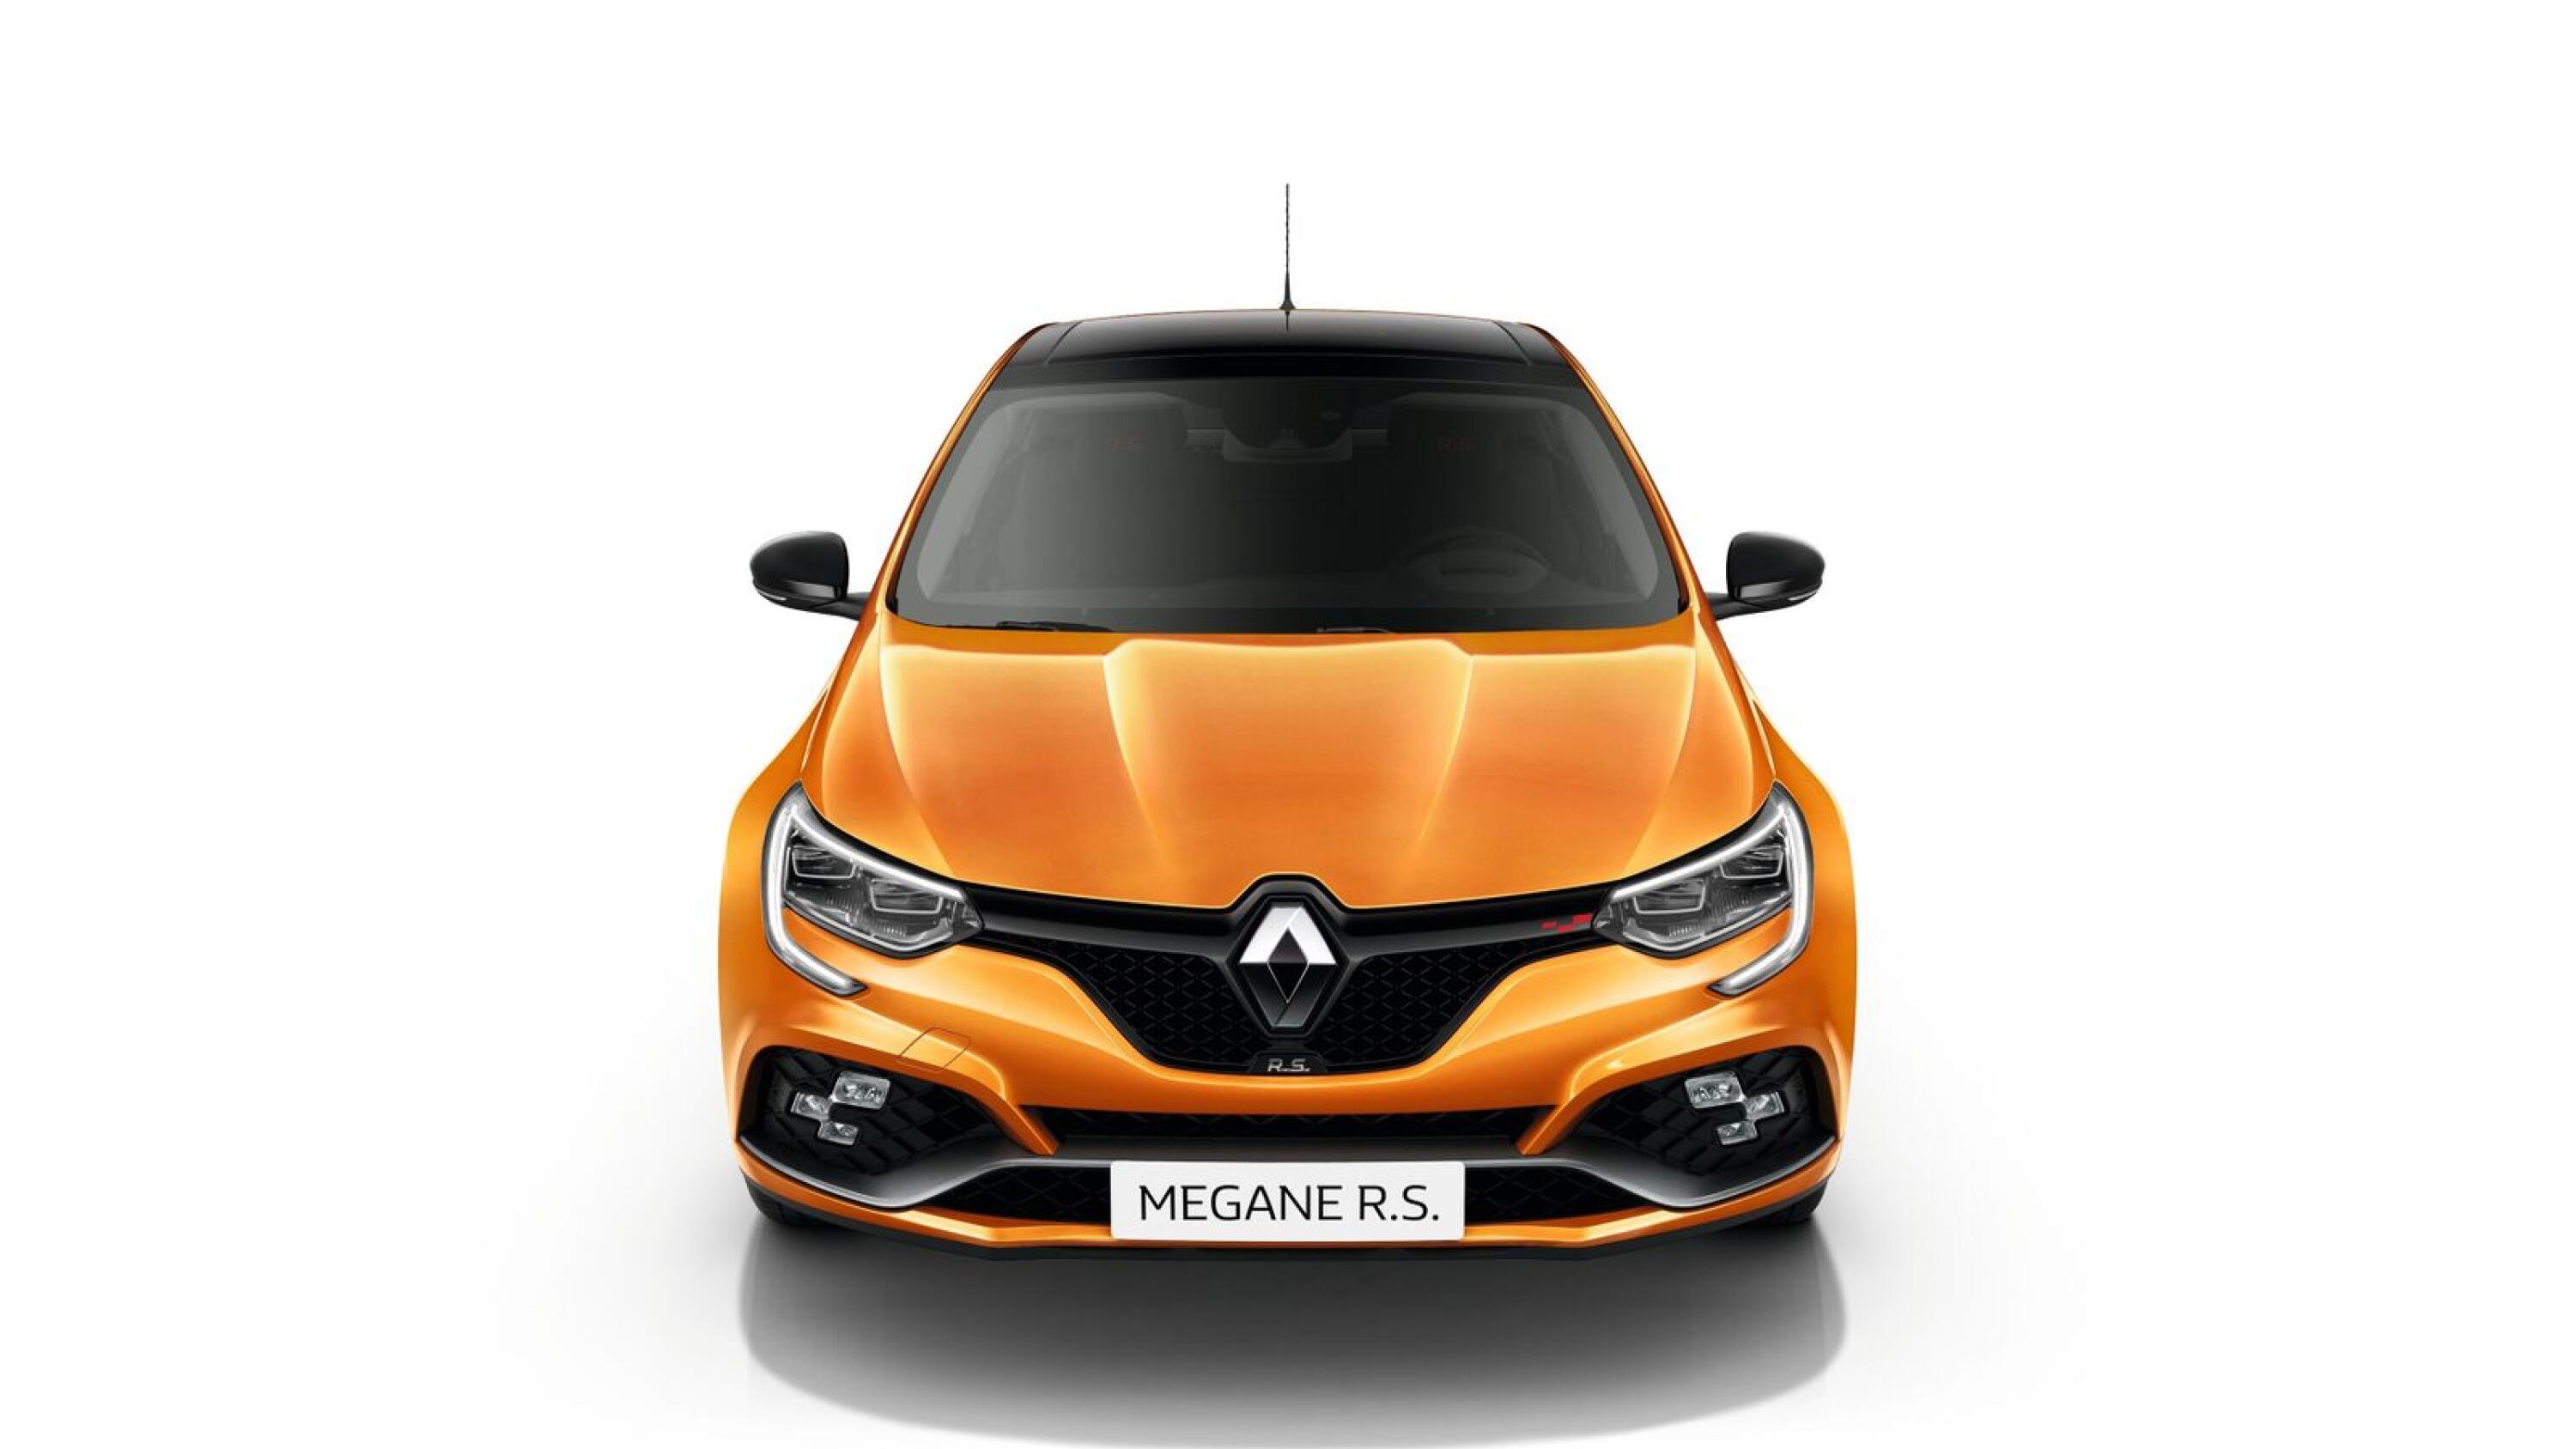 It might be your last chance to buy a new Renault RS car in South Africa